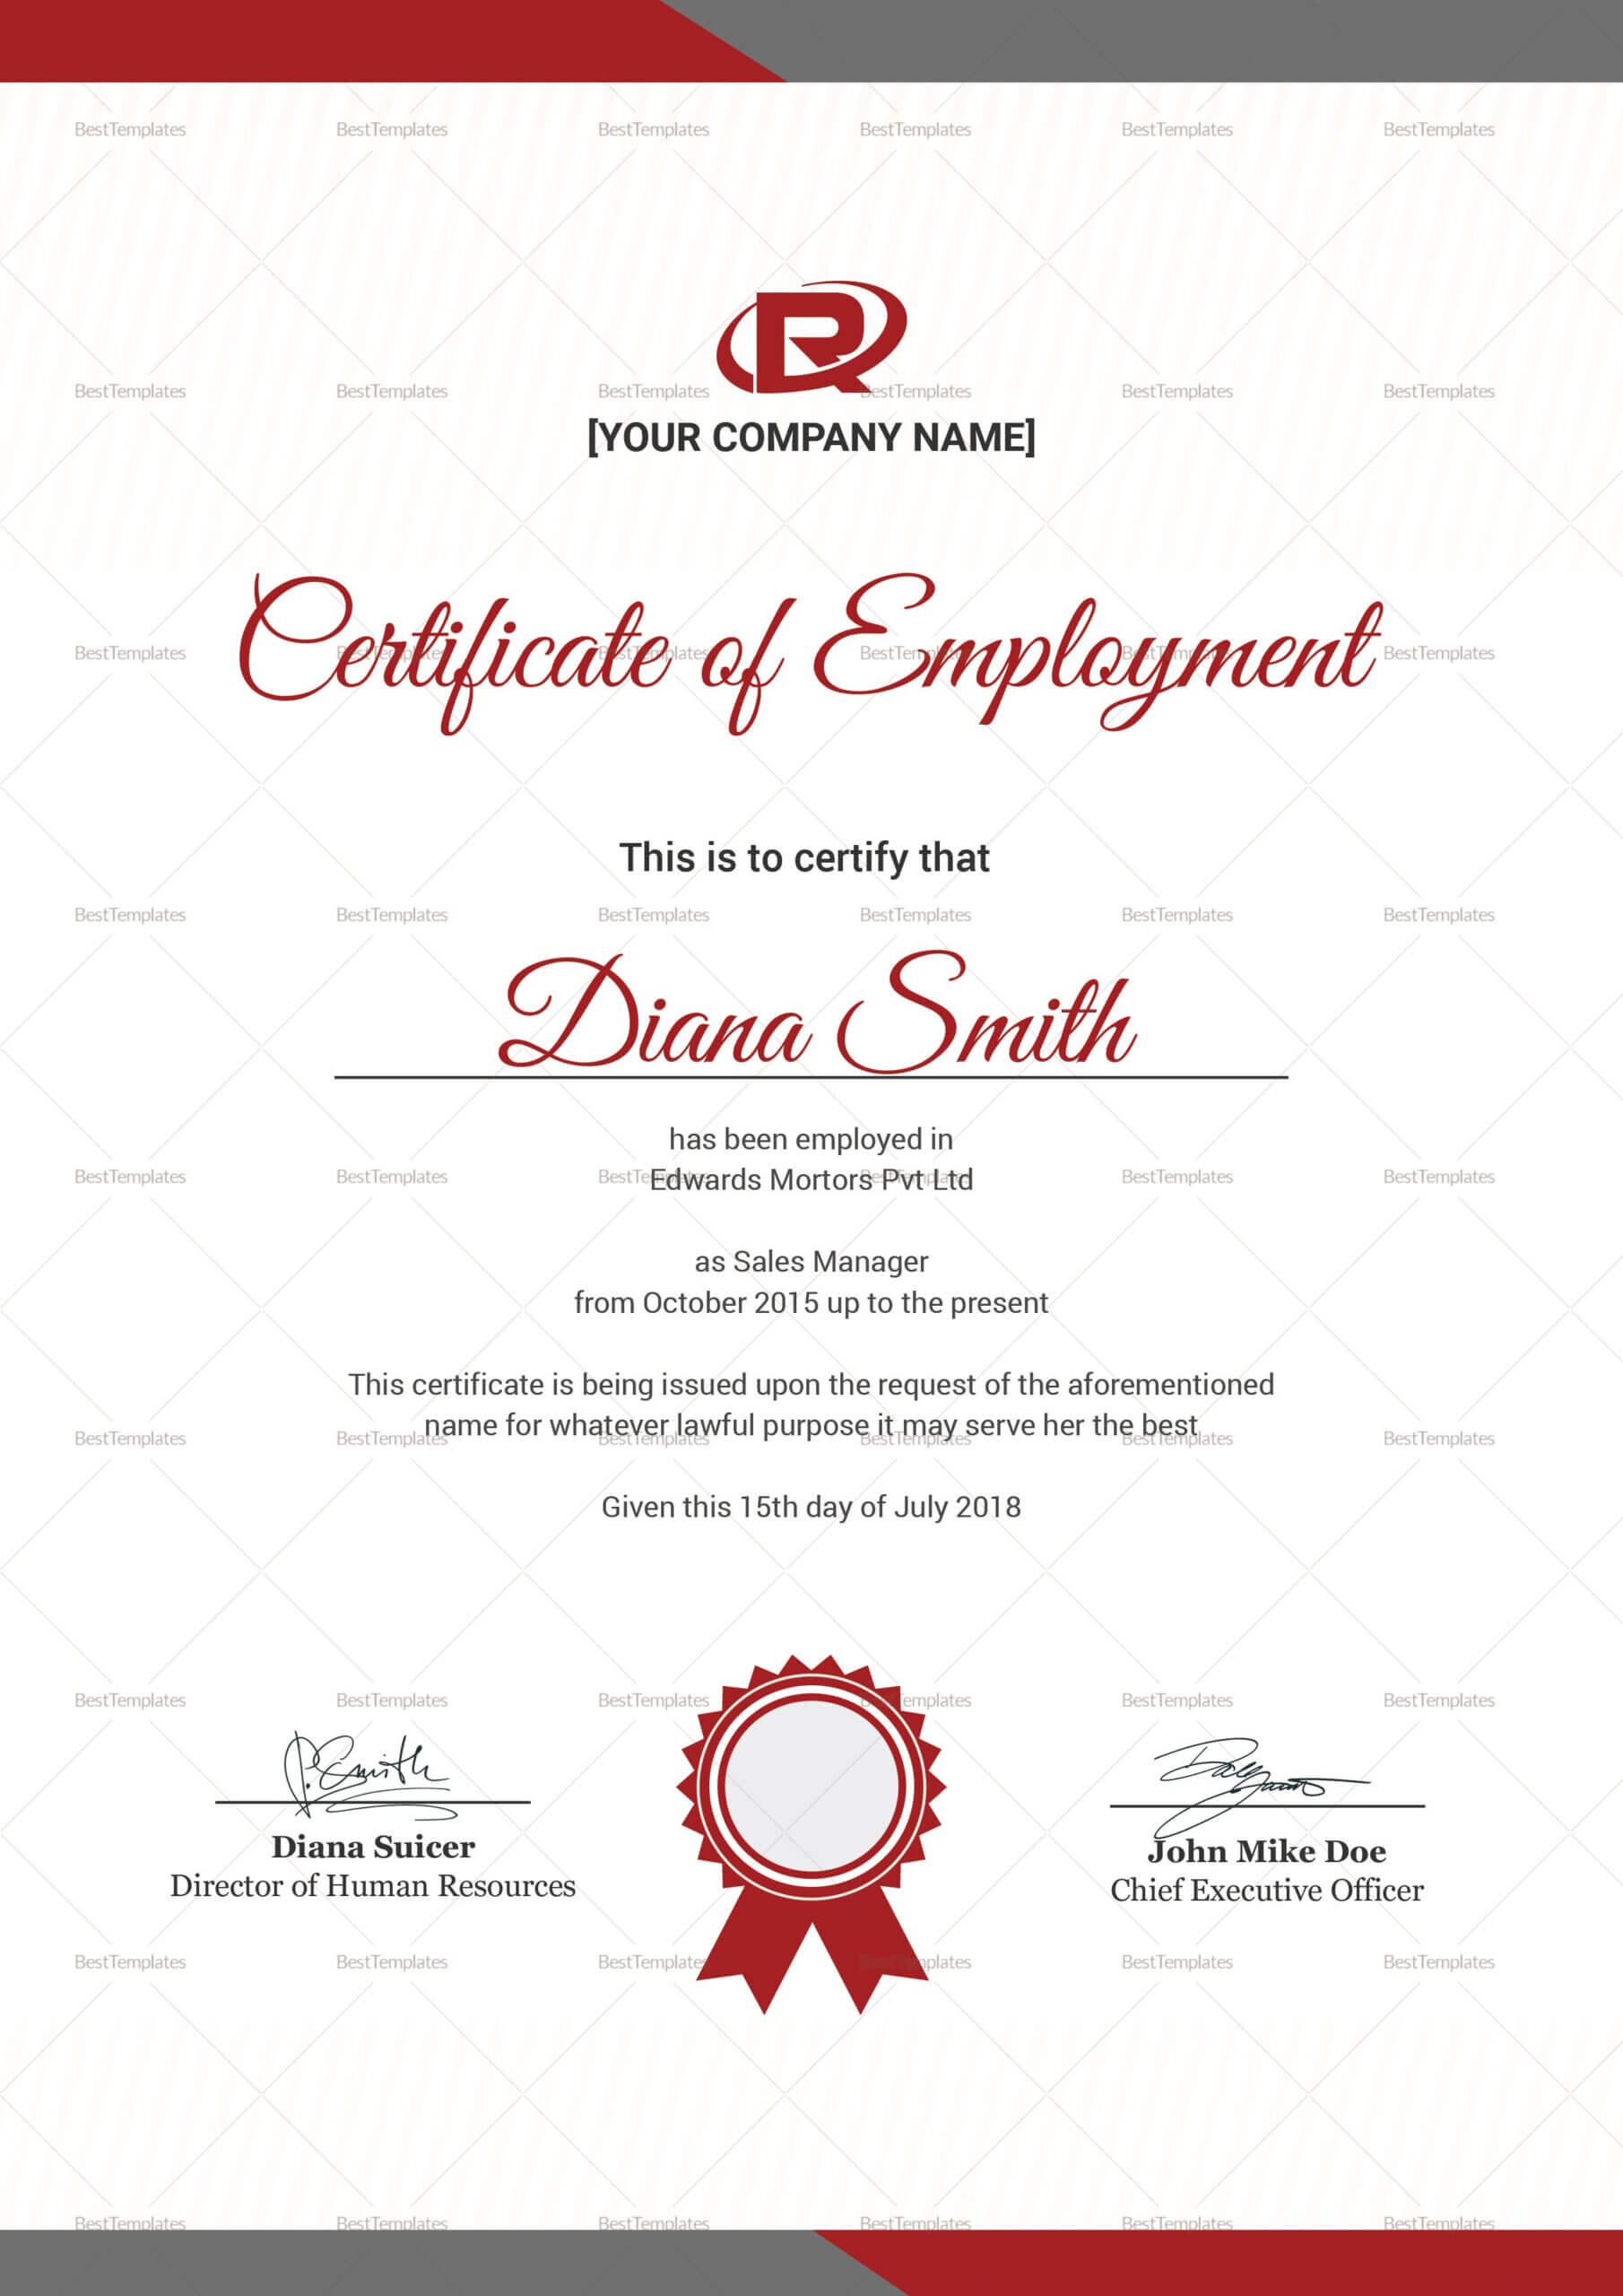 Productive Employment Certificate Template | Certificate Pertaining To Sales Certificate Template